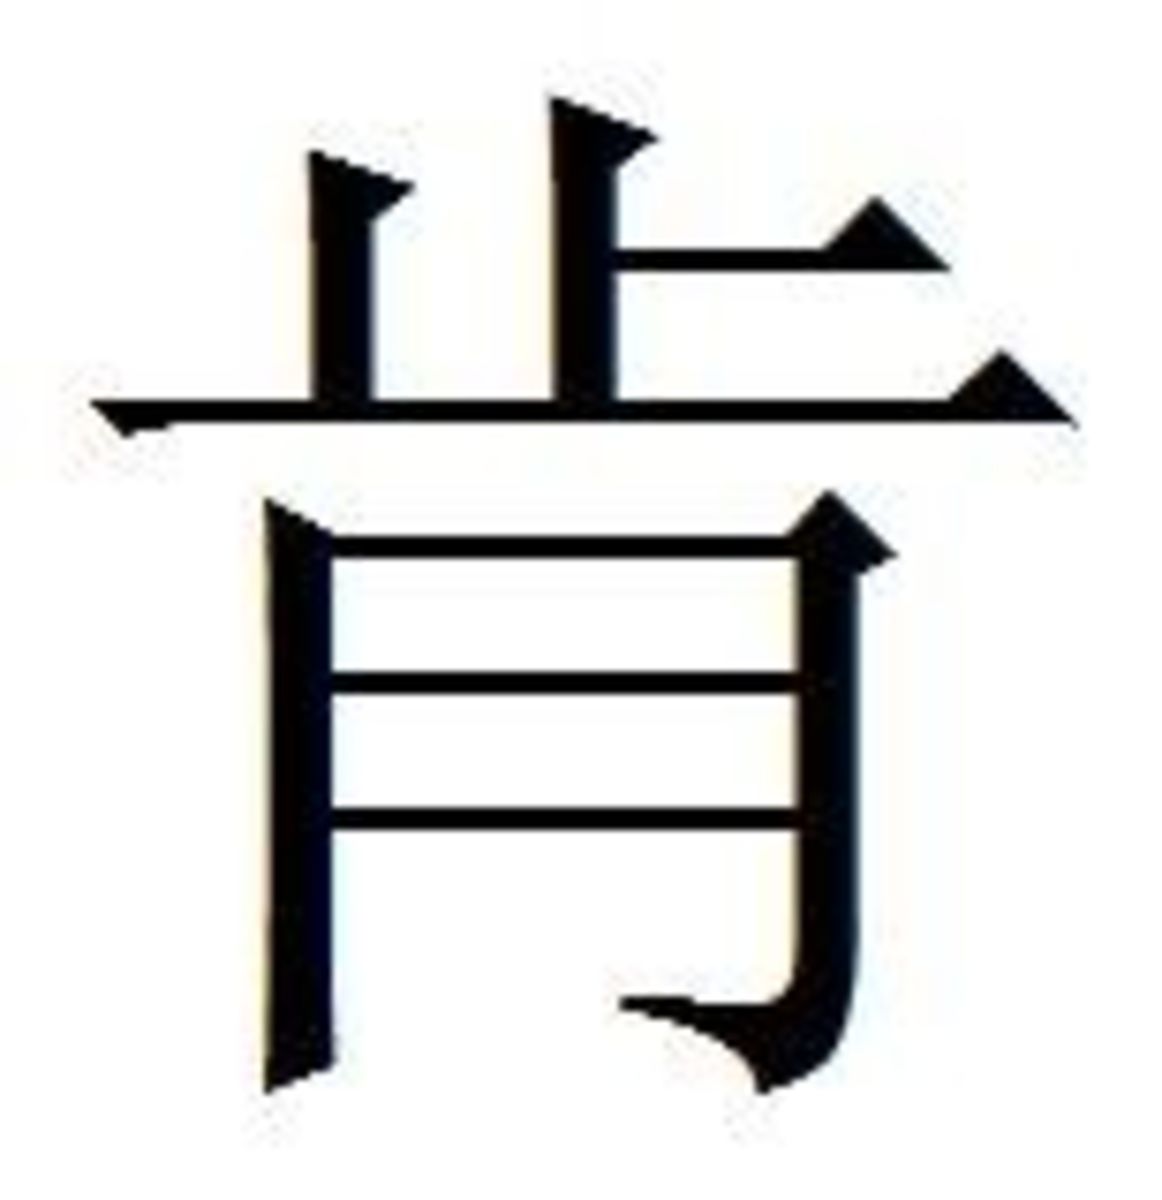 How to Write My Name in Chinese